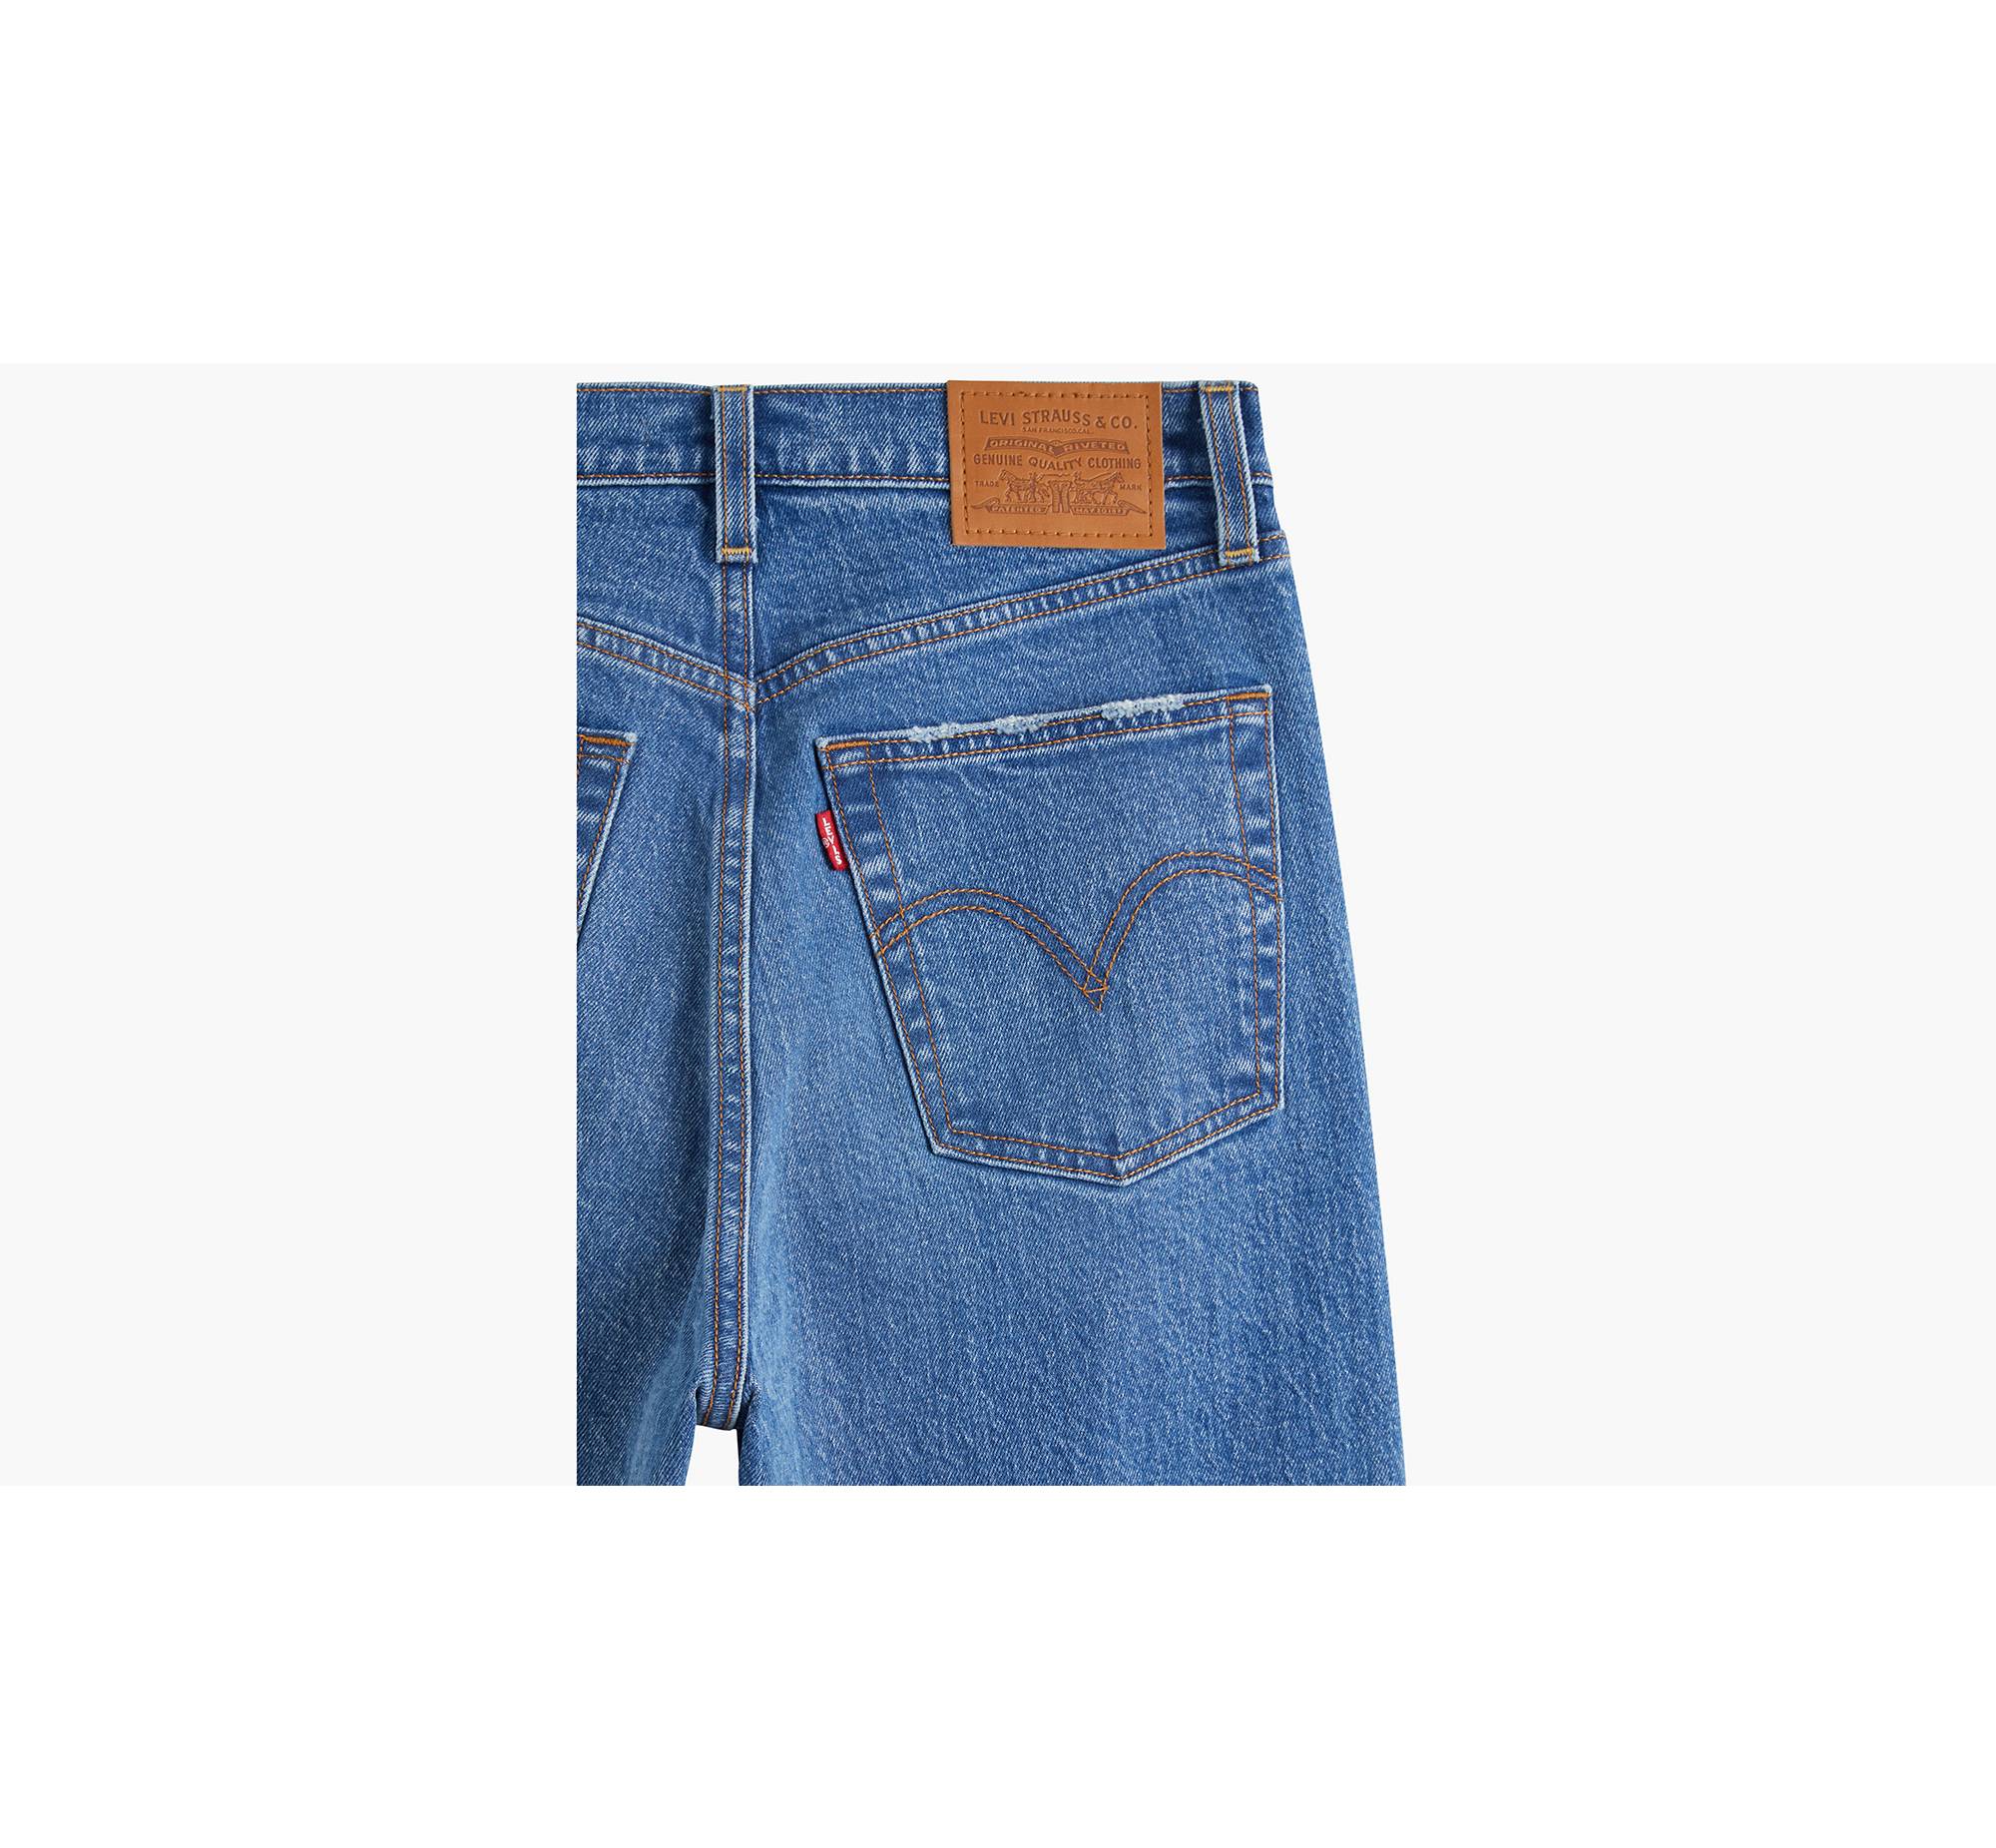 Ribcage Straight Ankle Women's Jeans - Light Wash | Levi's® US